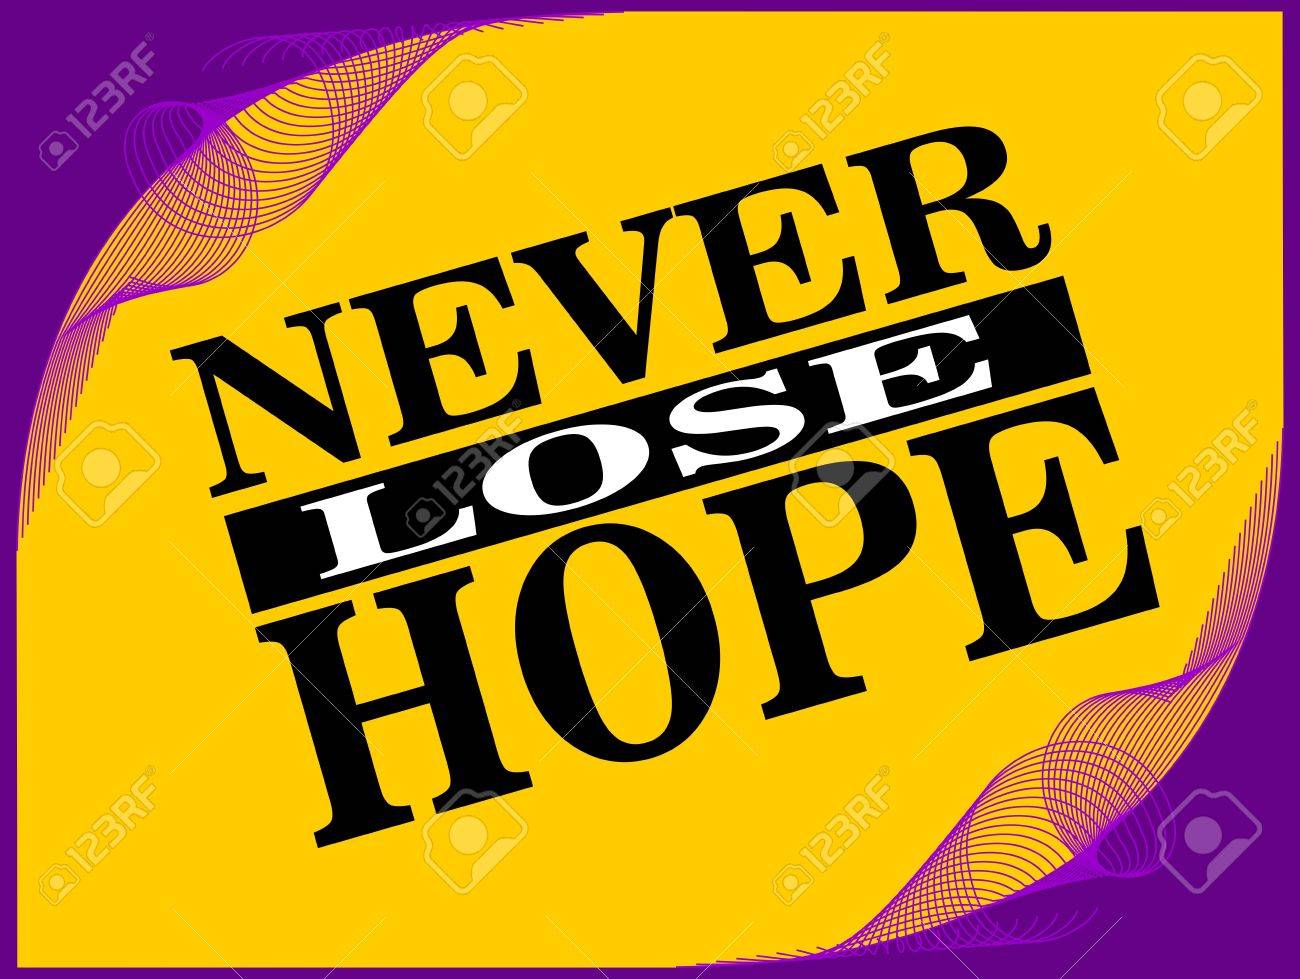 Poster Or Wallpaper With An Inspiring Phrase Never Lose Hope